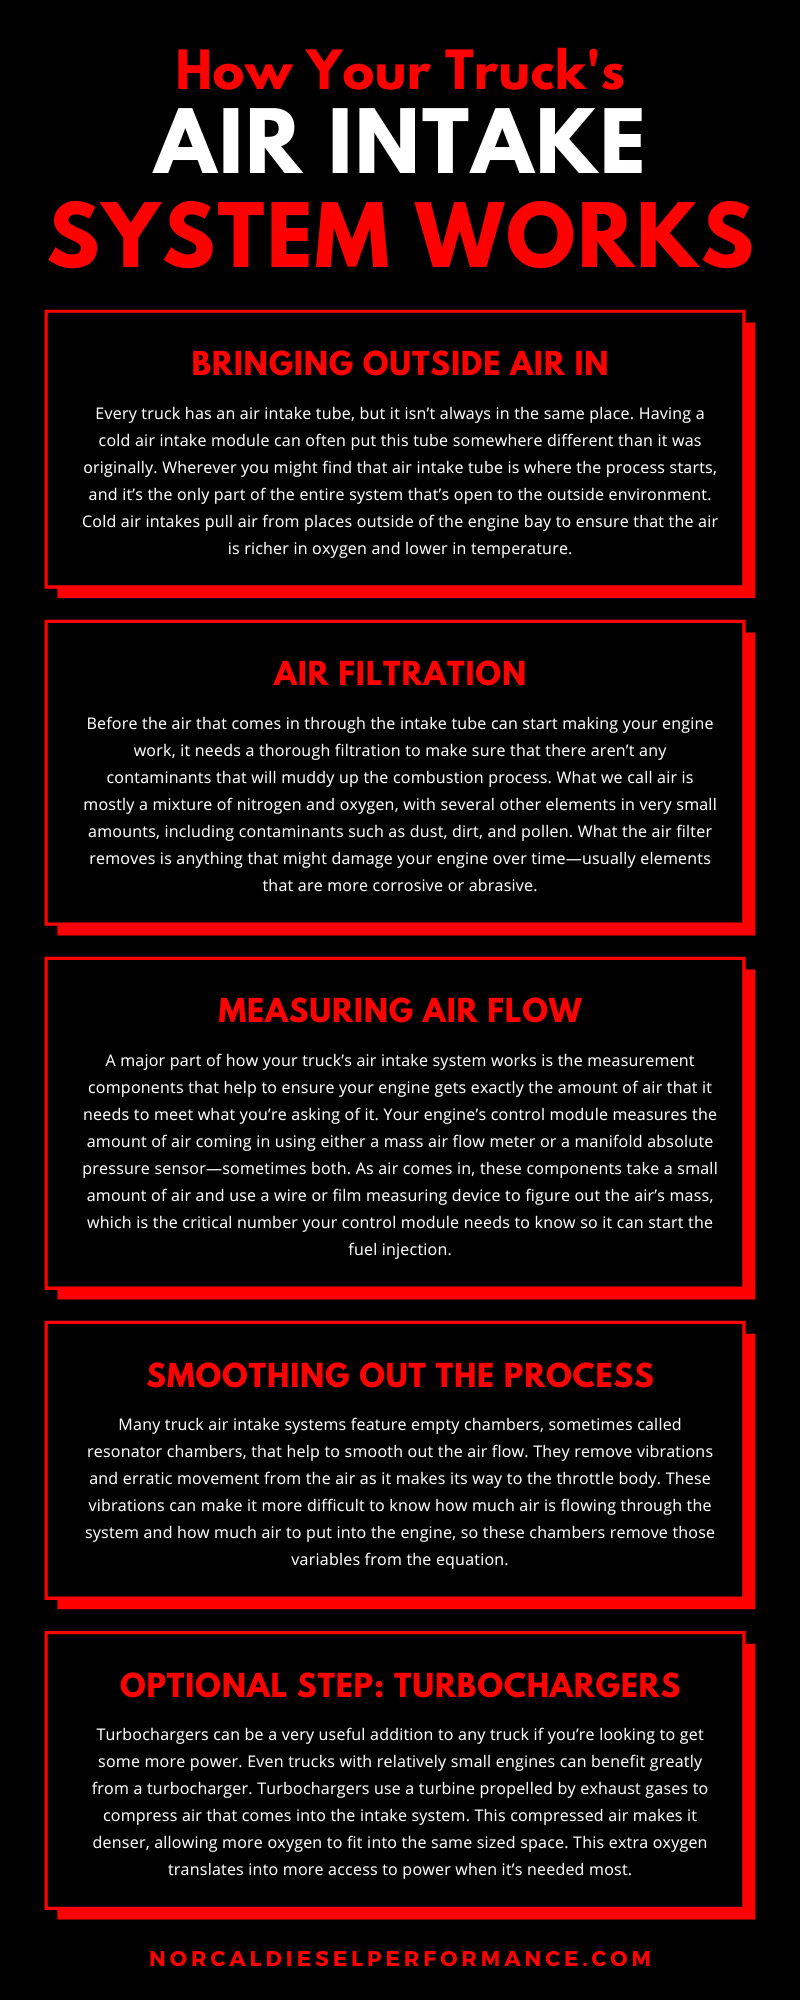 How Your Truck's Air Intake System Works